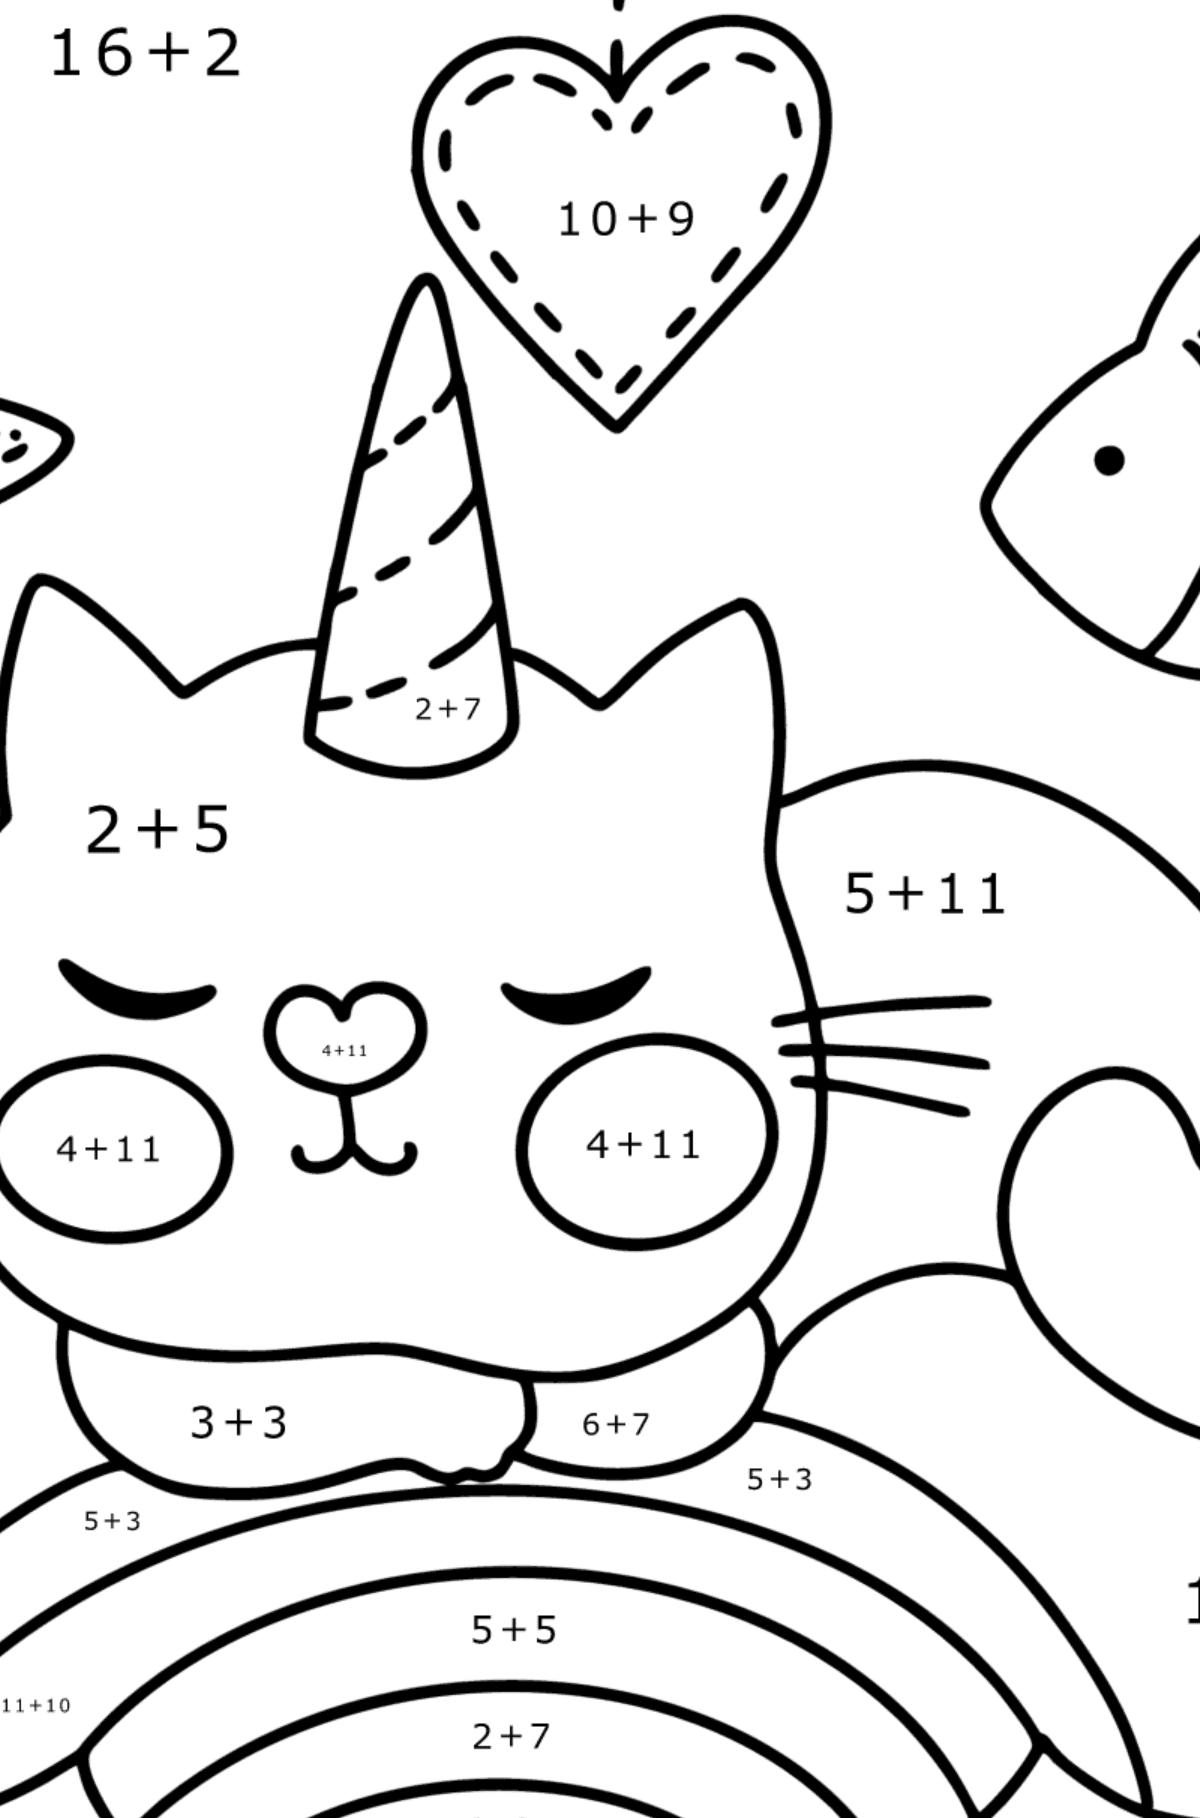 Cute cat unicorn coloring page - Math Coloring - Addition for Kids